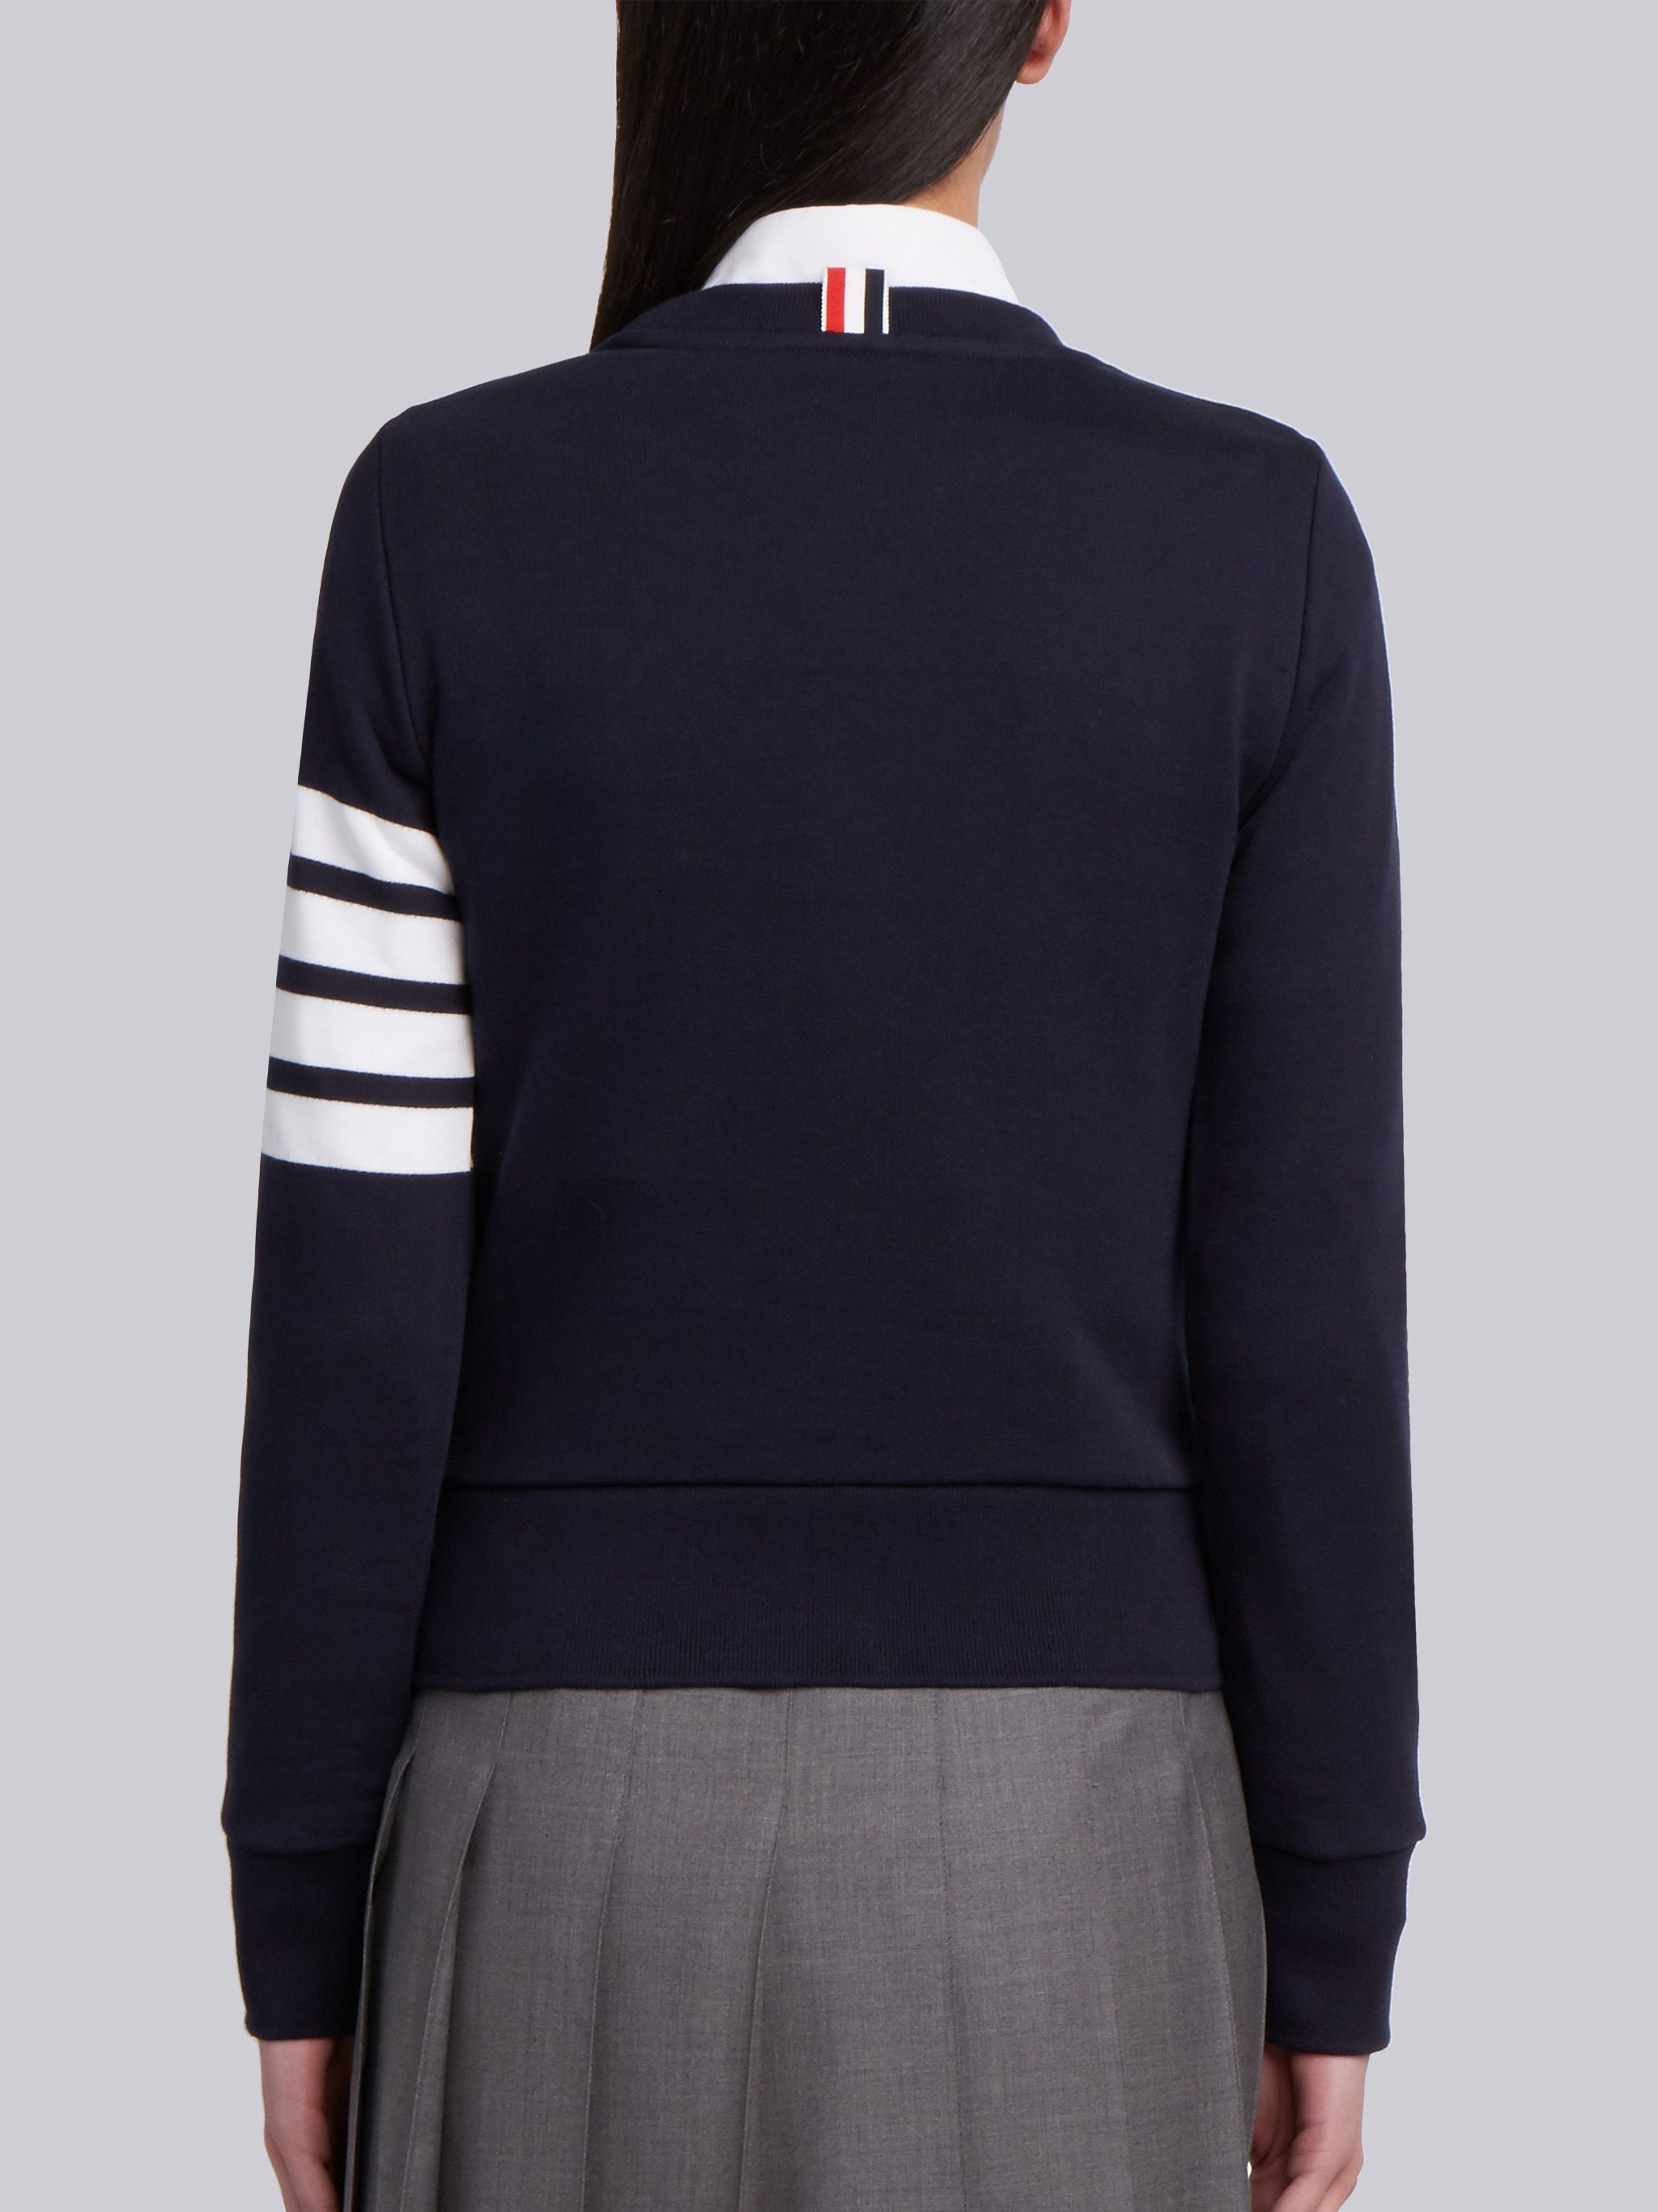 Navy Loopback Jersey Knit Engineered 4-bar Stripe Classic Crew Neck Pullover - 3